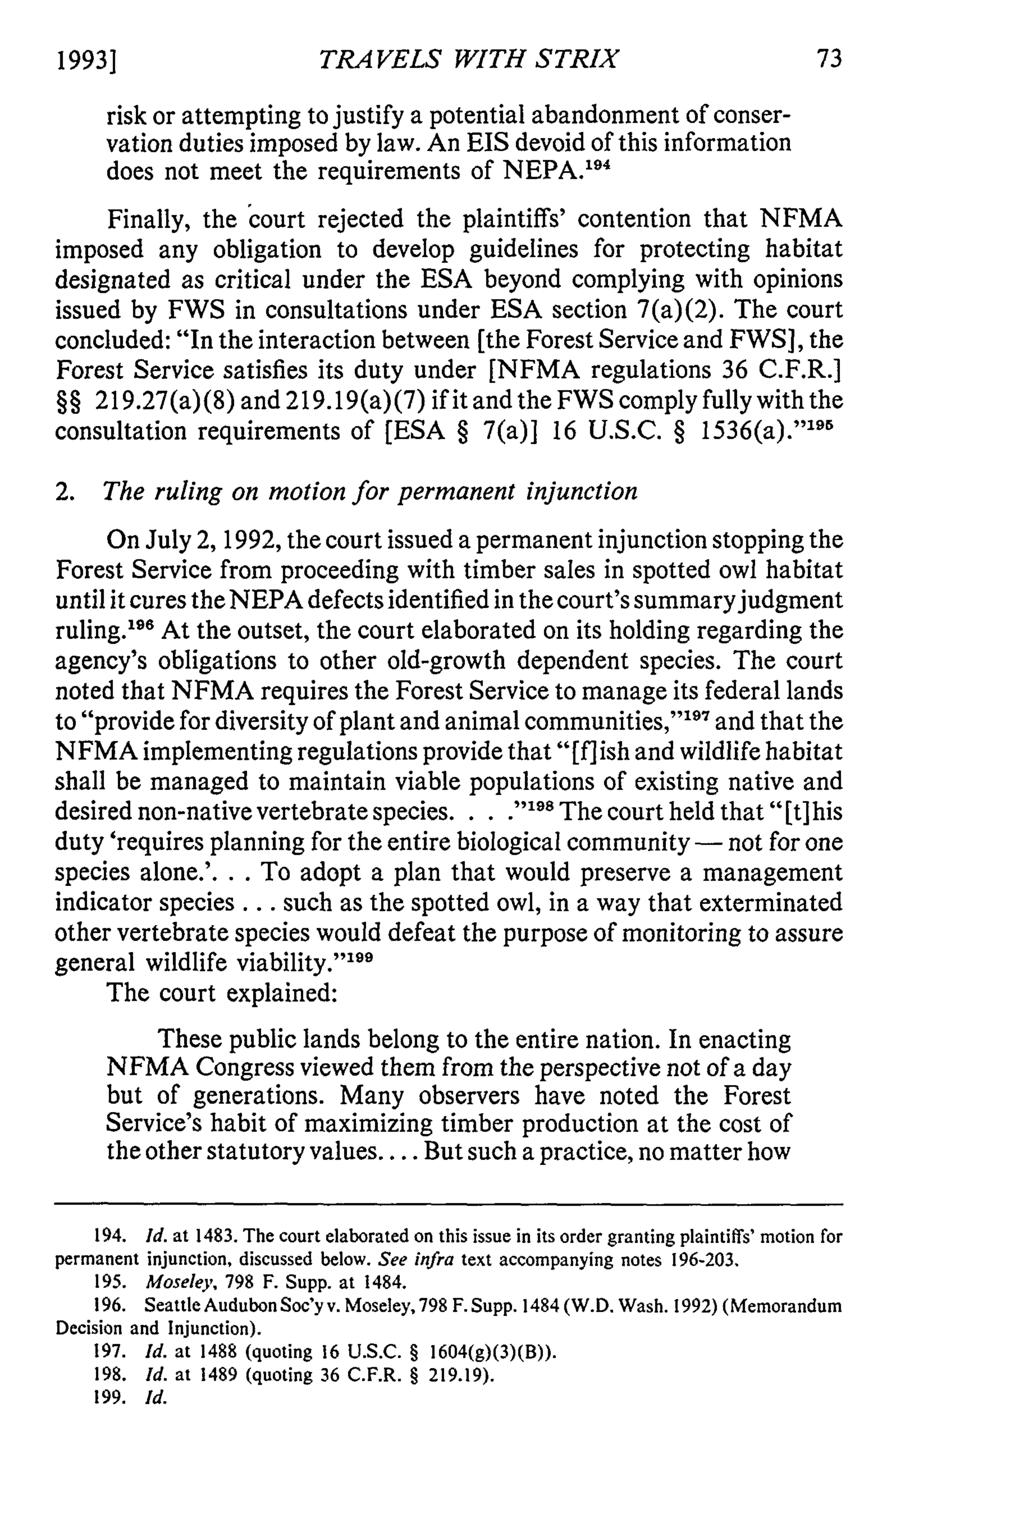 19931 TRAVELS WITH STRIX risk or attempting to justify a potential abandonment of conservation duties imposed by law. An EIS devoid of this information does not meet the requirements of NEPA.